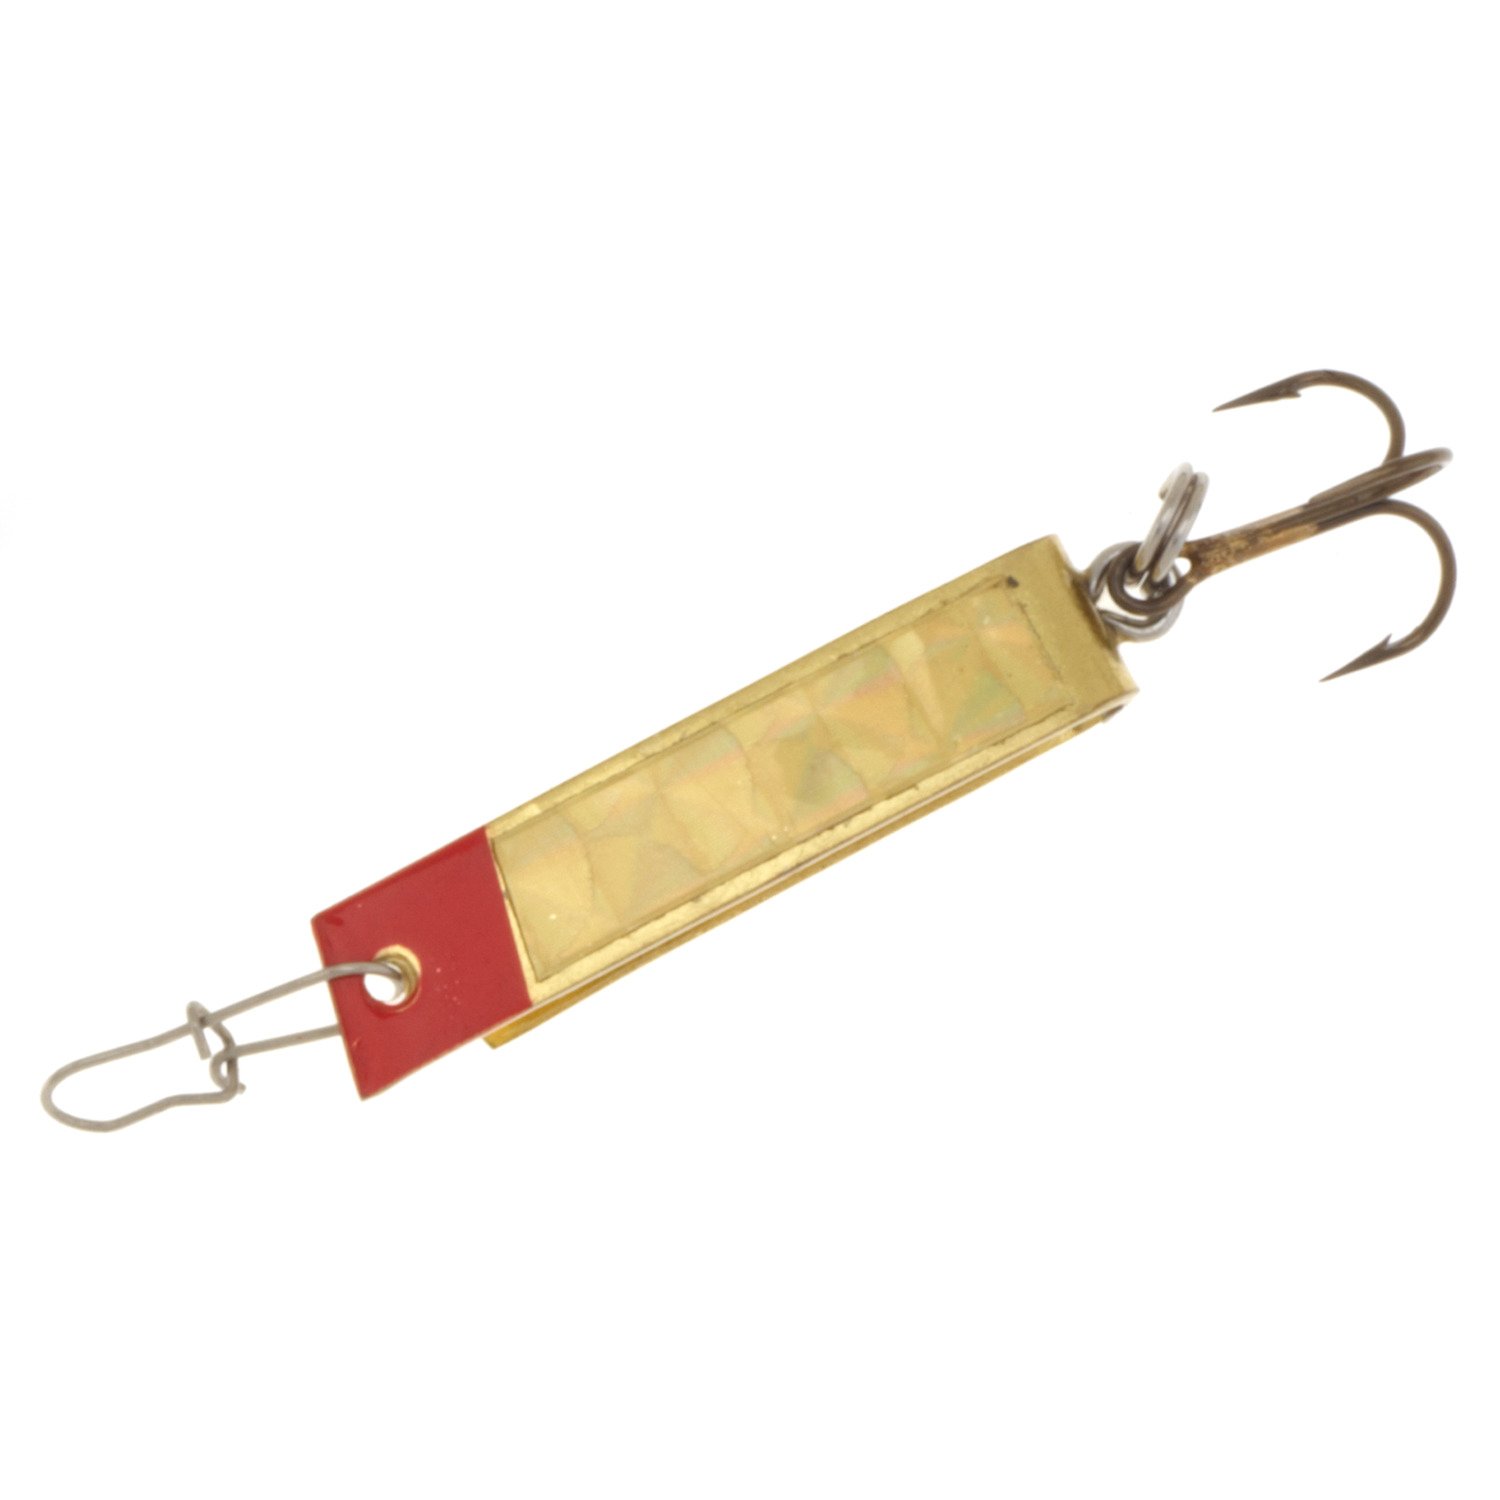 Luhr Jensen 501 Super Duper Metal Trout Fishing Lure Red & Gold F7 and More  for sale online